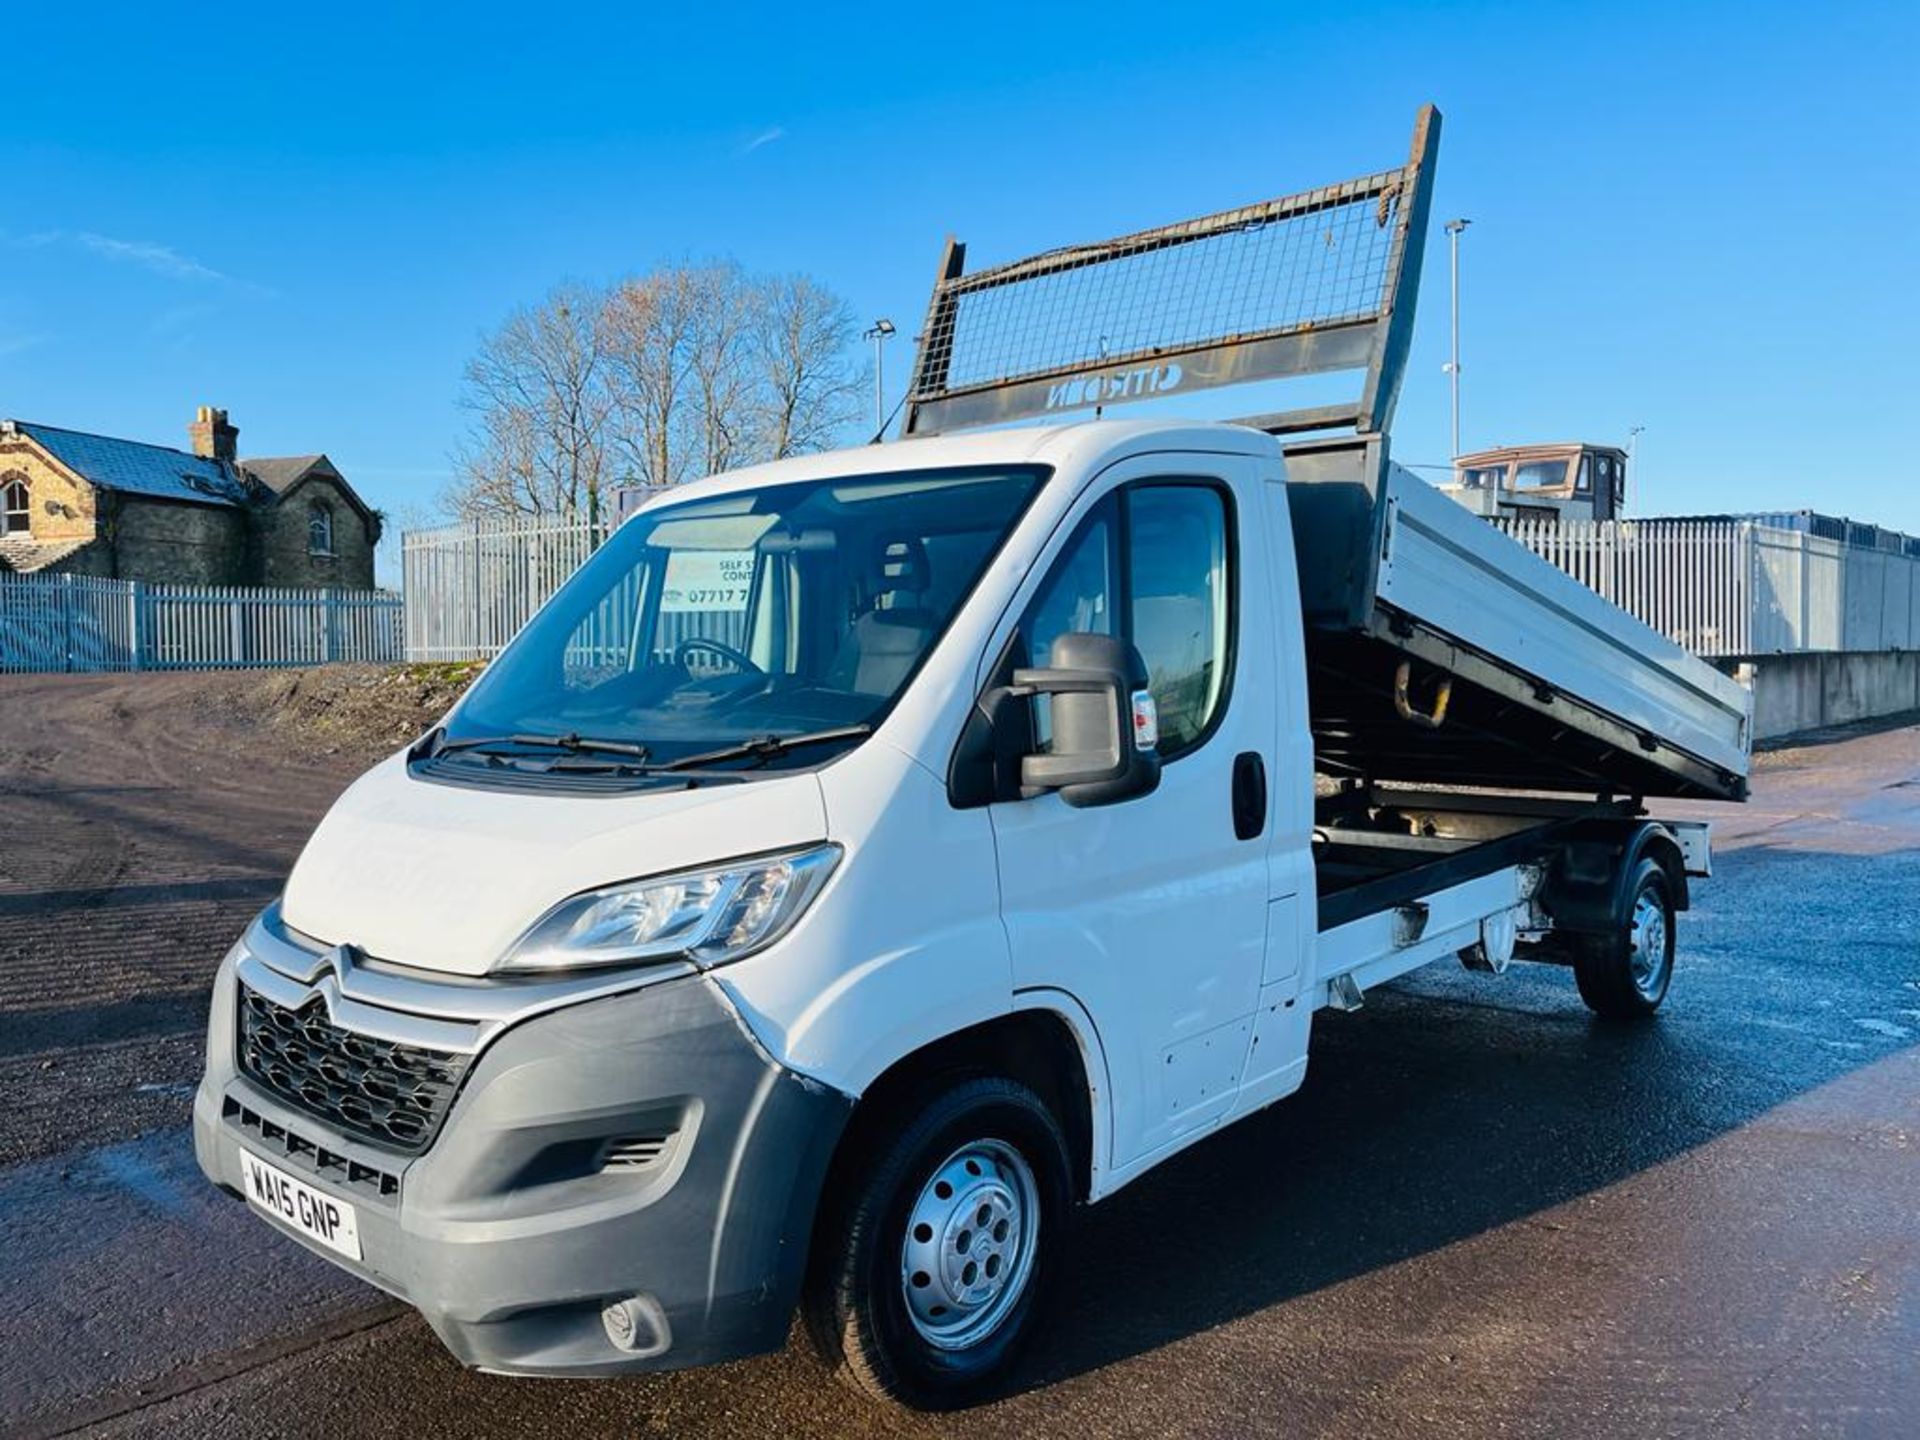 ** ON SALE ** Citroen Relay 35 2.2 HDI 130 LWB Alloy Tipper 2015 '15 Reg' Only 105,090 Miles - Image 4 of 31